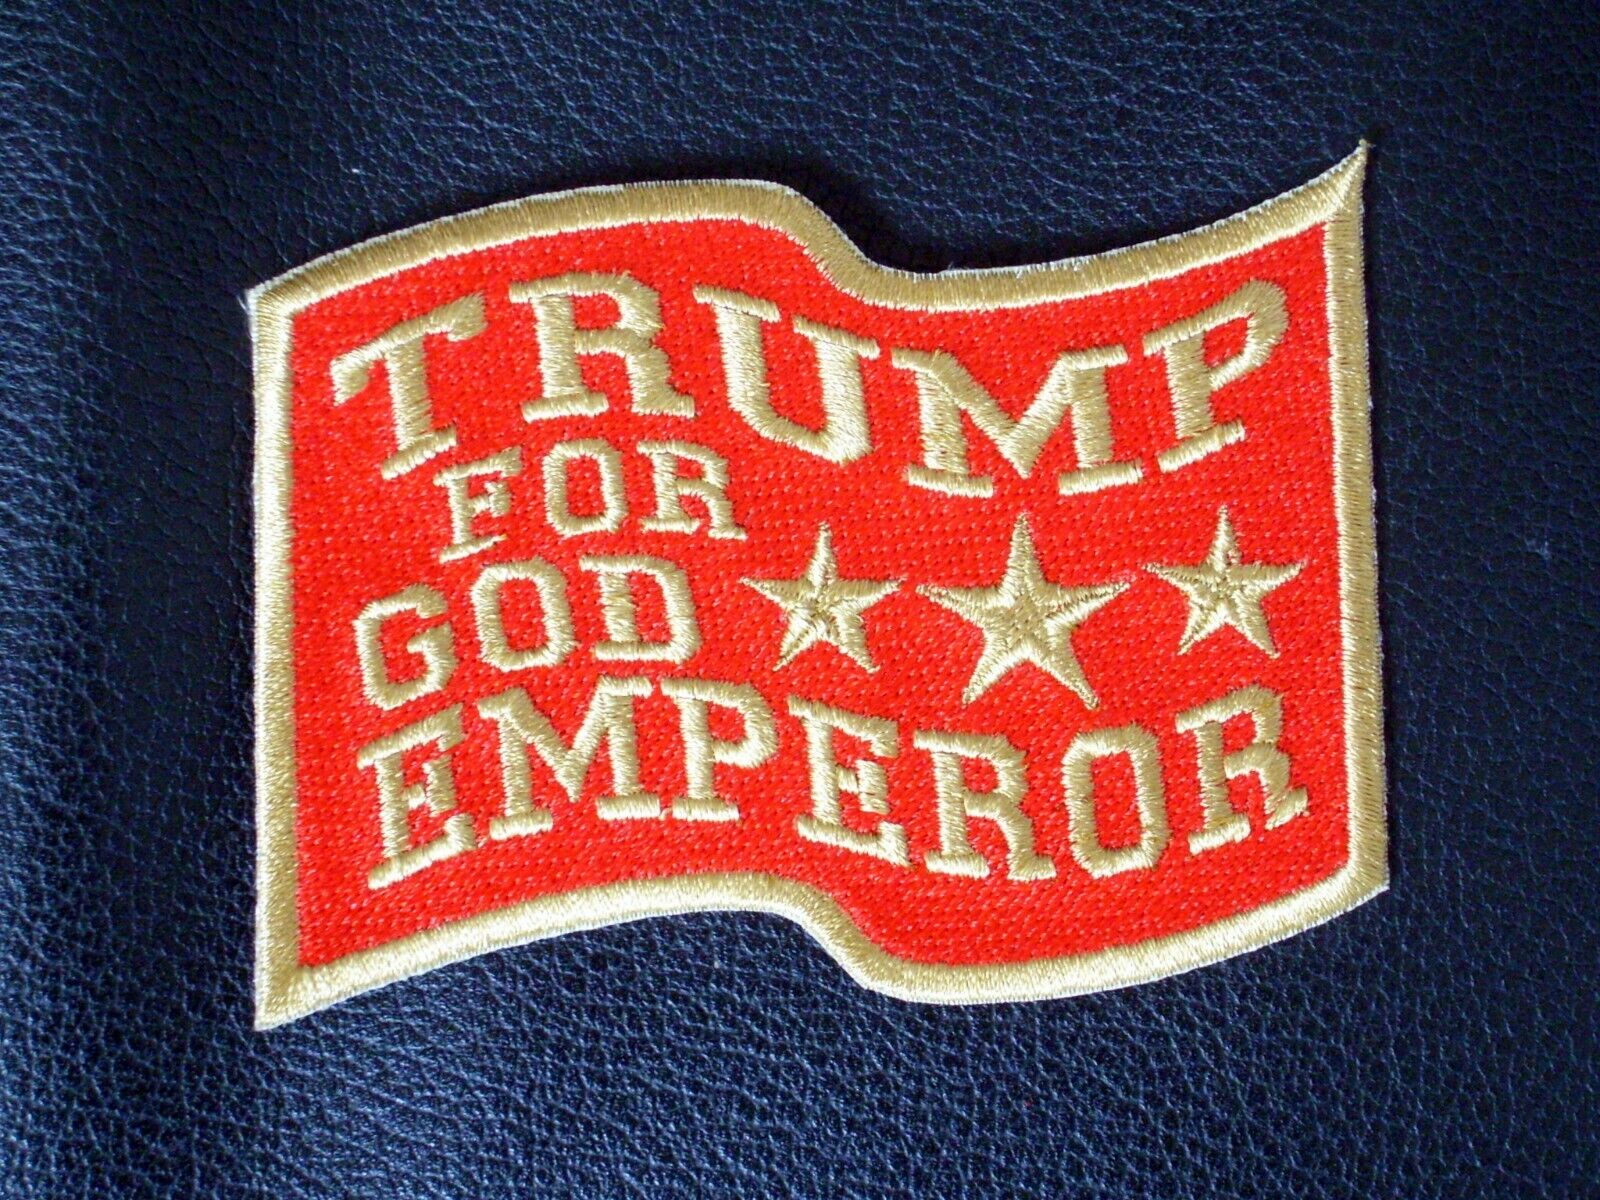 TRUMP for GOD EMPEROR Ver2 Red/Gold Embroidered Patch, Election,Campaign, Biker